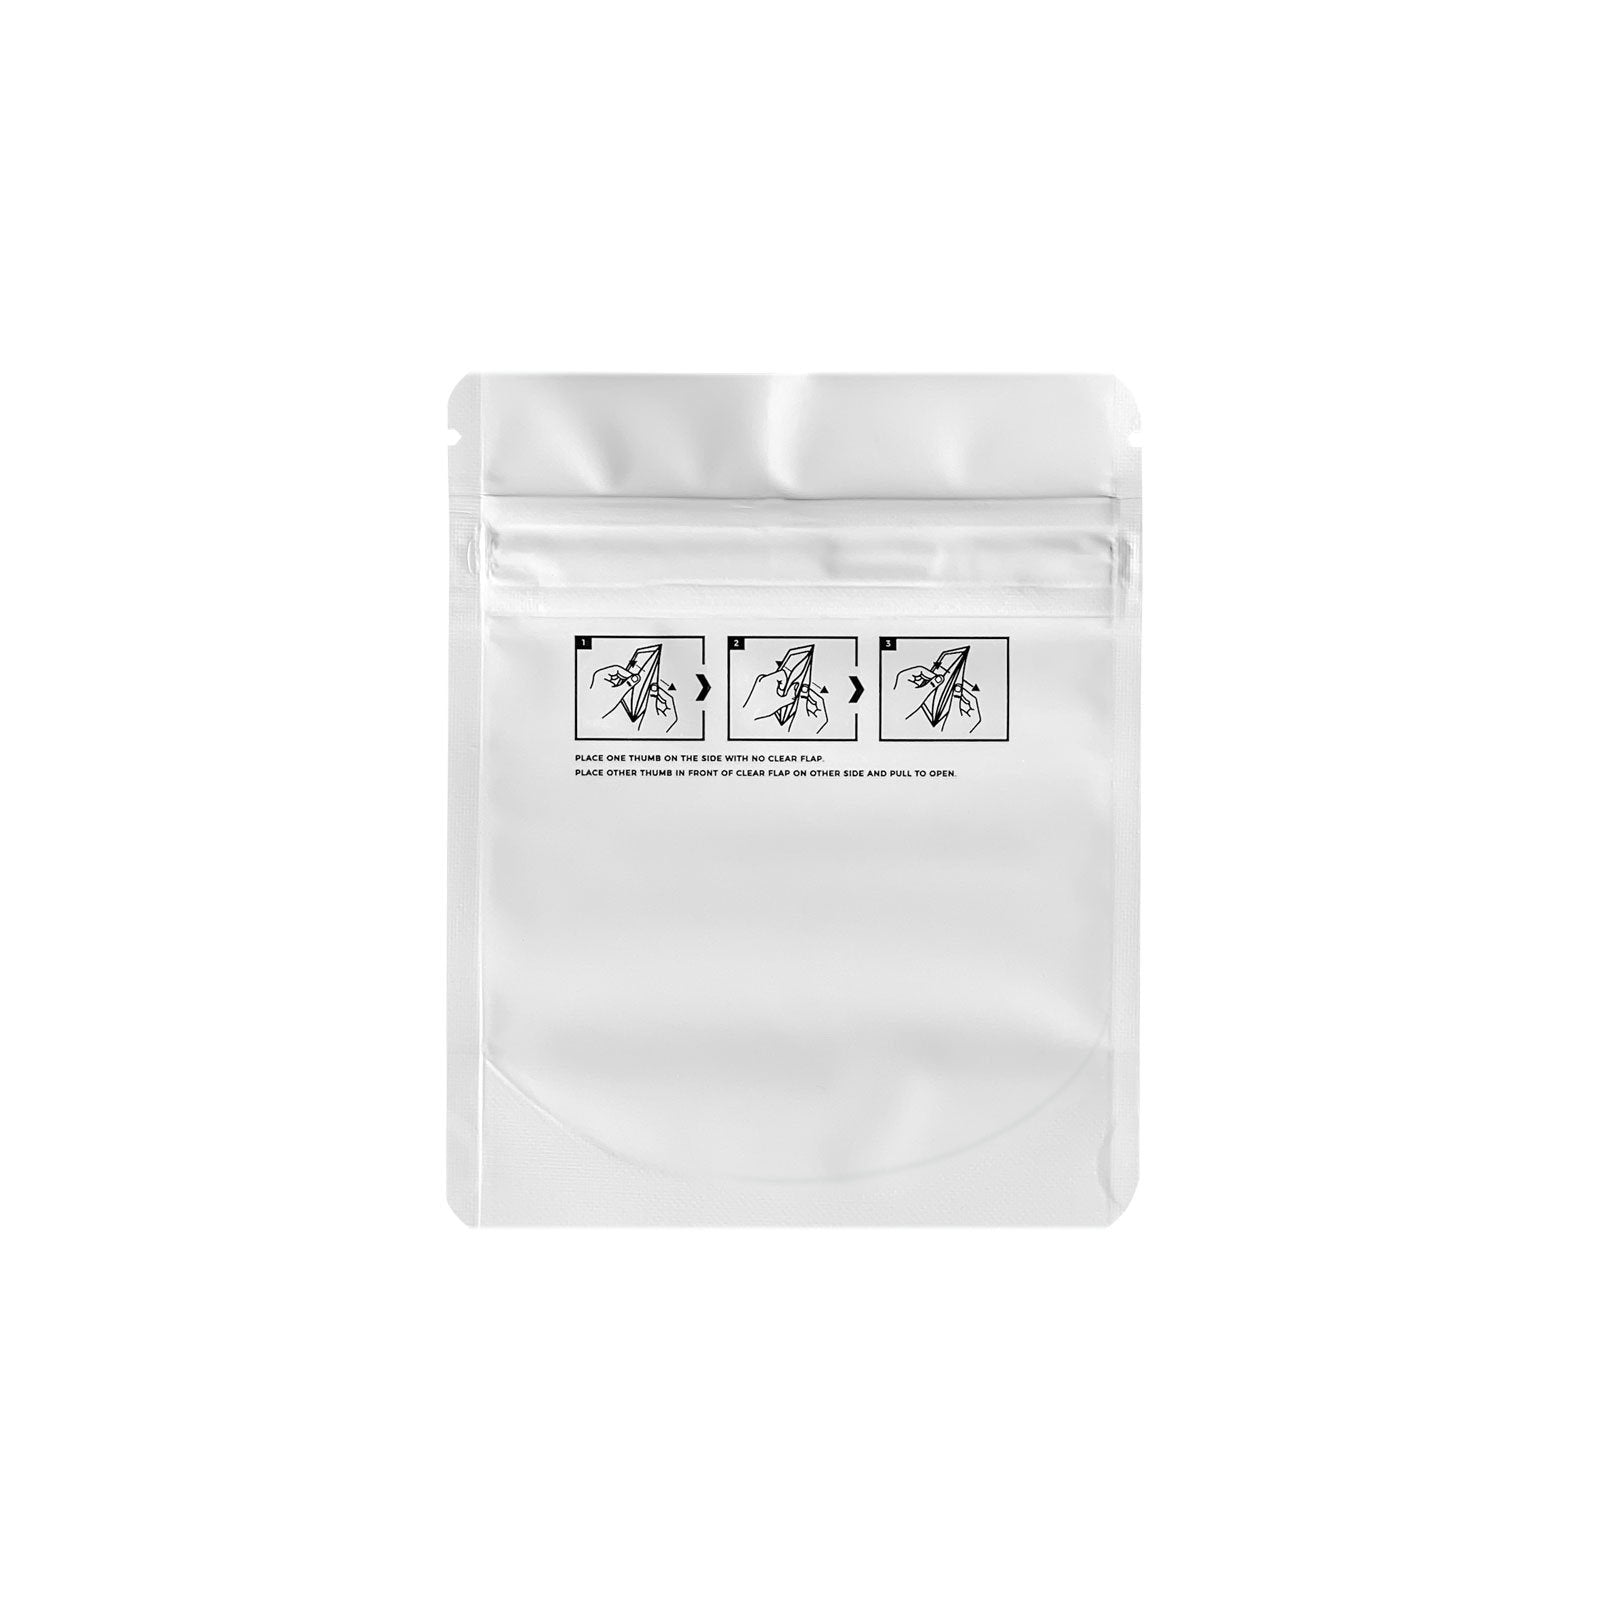 1/8 Ounce Child Resistant Bags All White 4"x5"+2" - 100 Count